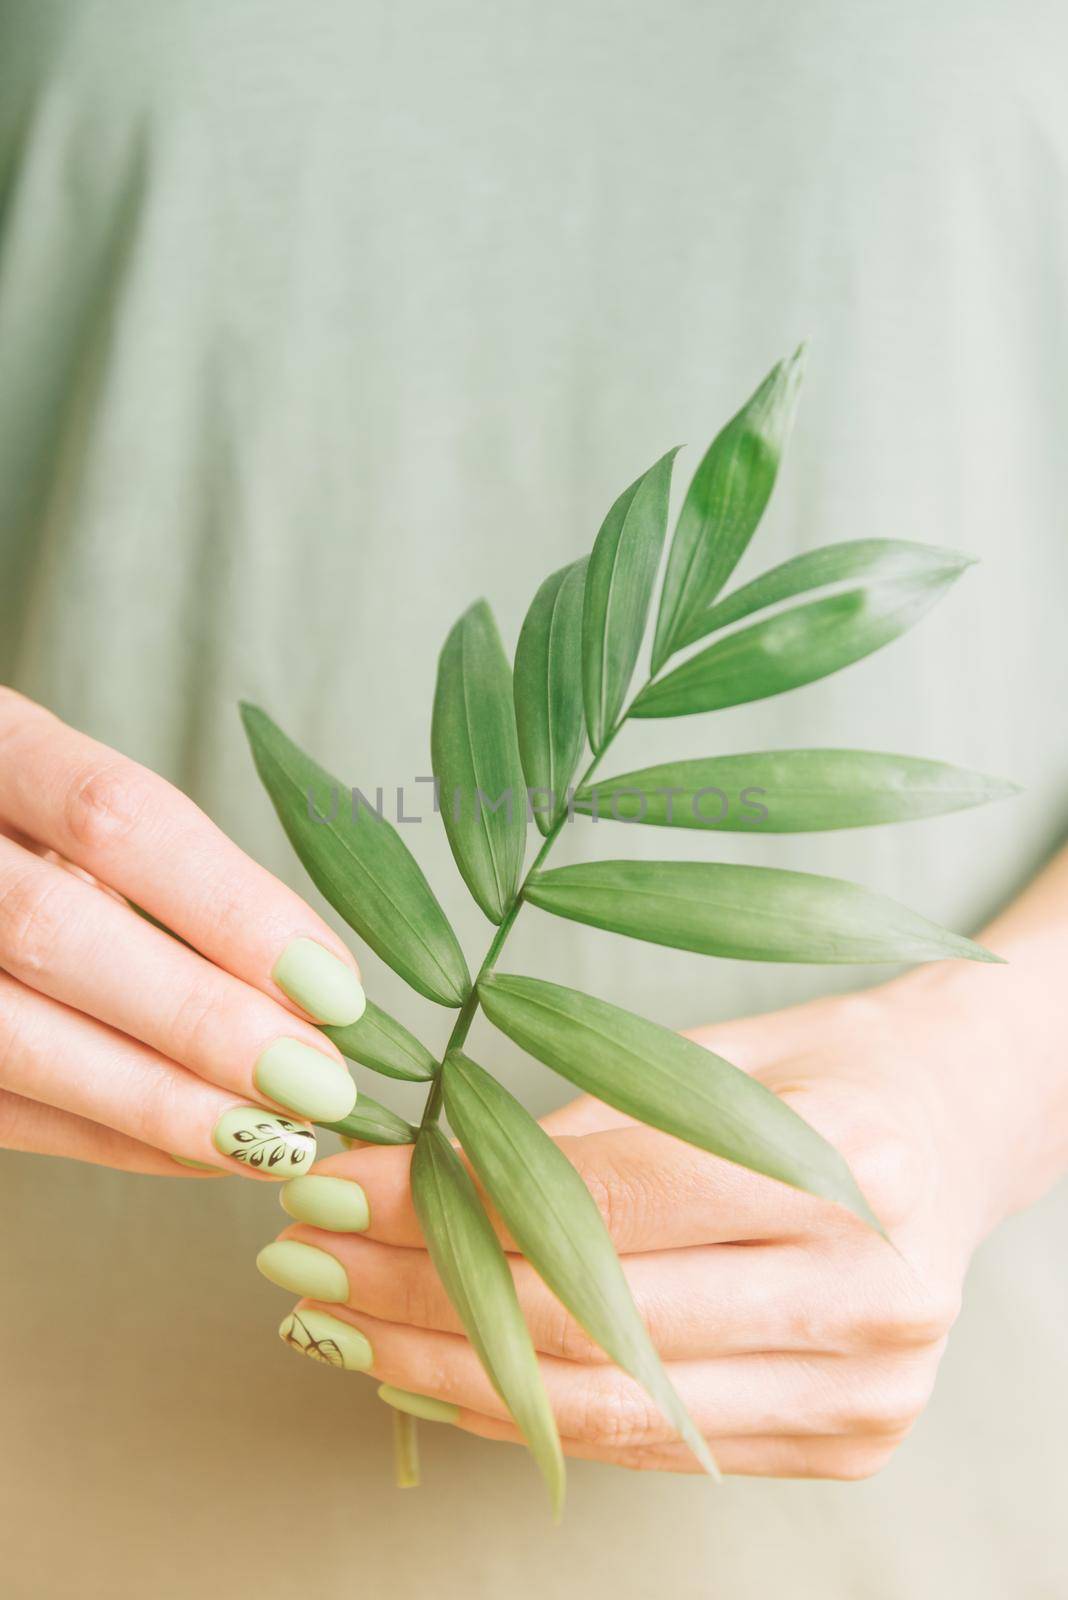 Female hands with beautiful green summer style manicure and art-nail holding palm leaf.